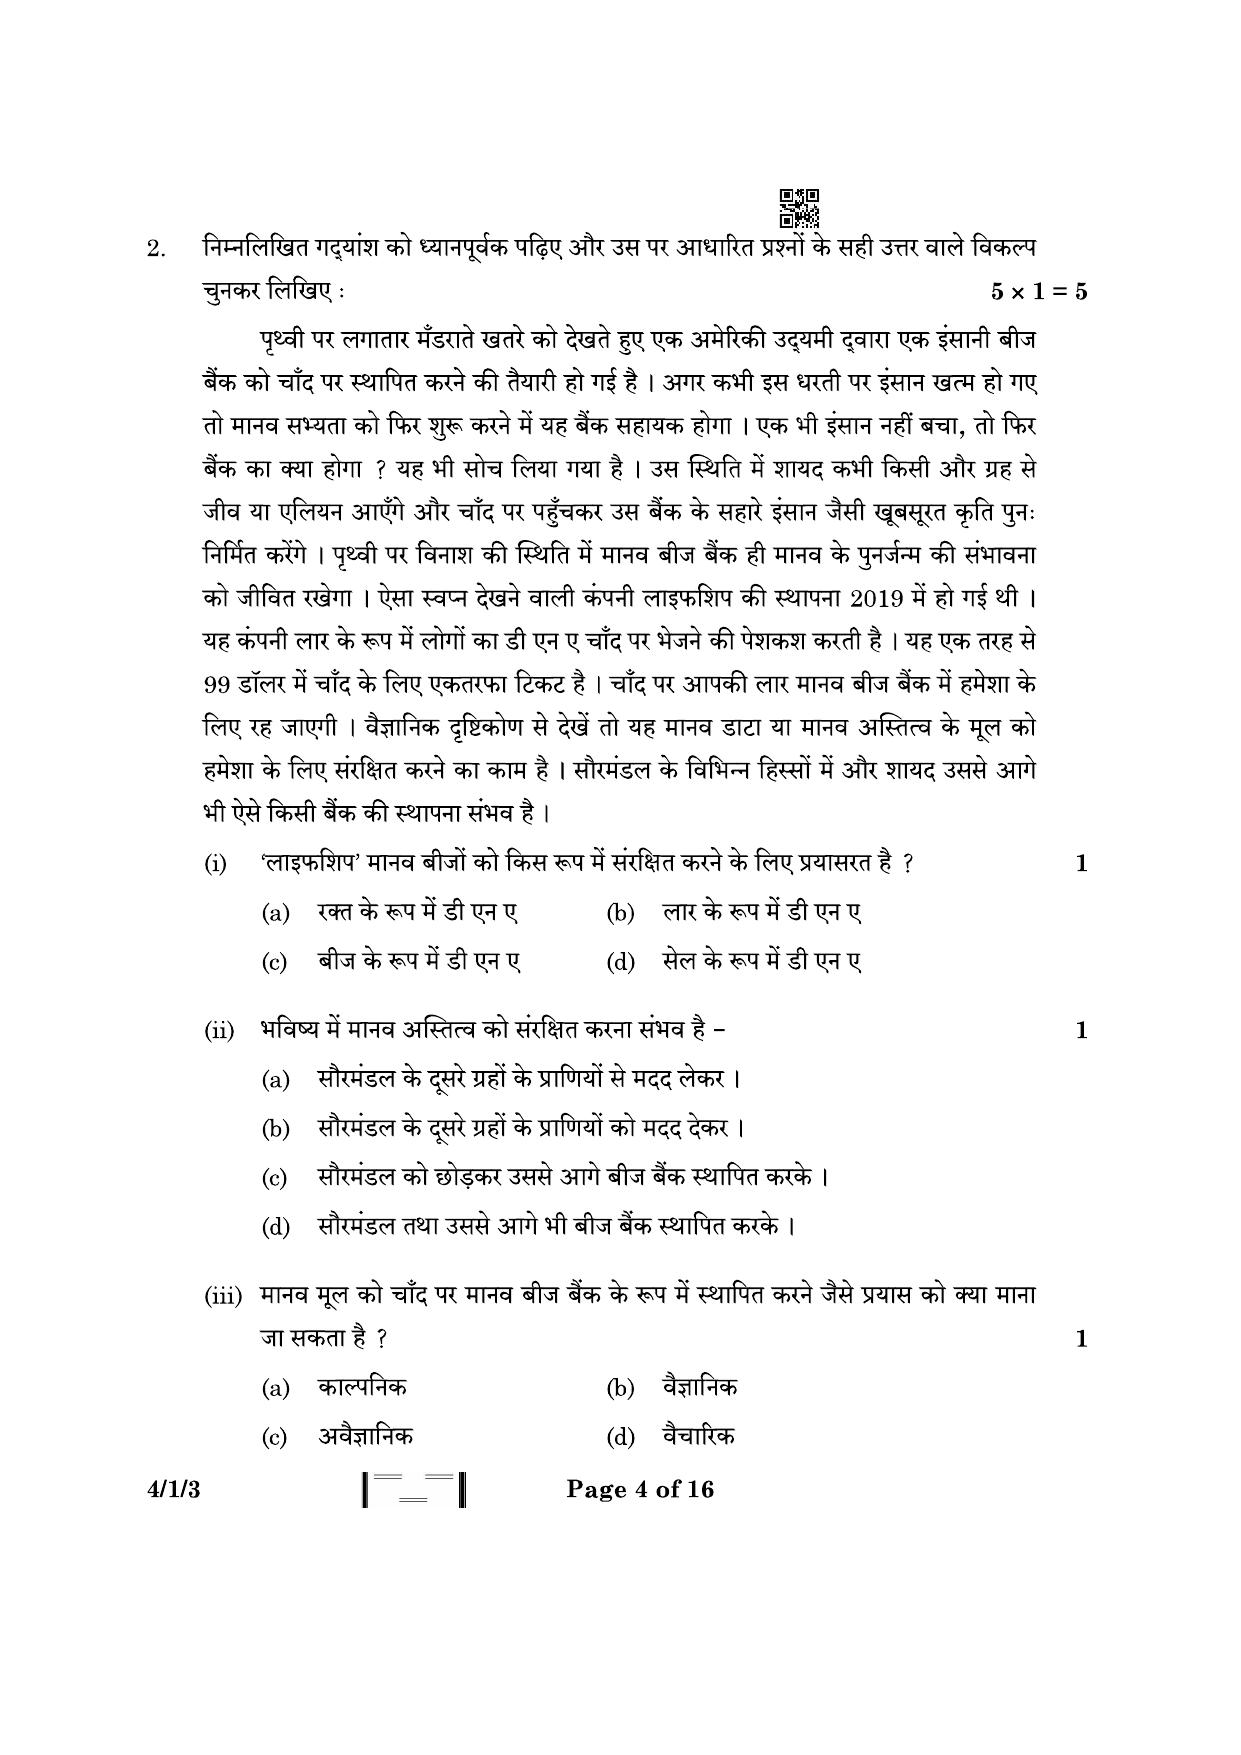 CBSE Class 10 4-1-3 Hindi B 2023 Question Paper - Page 4